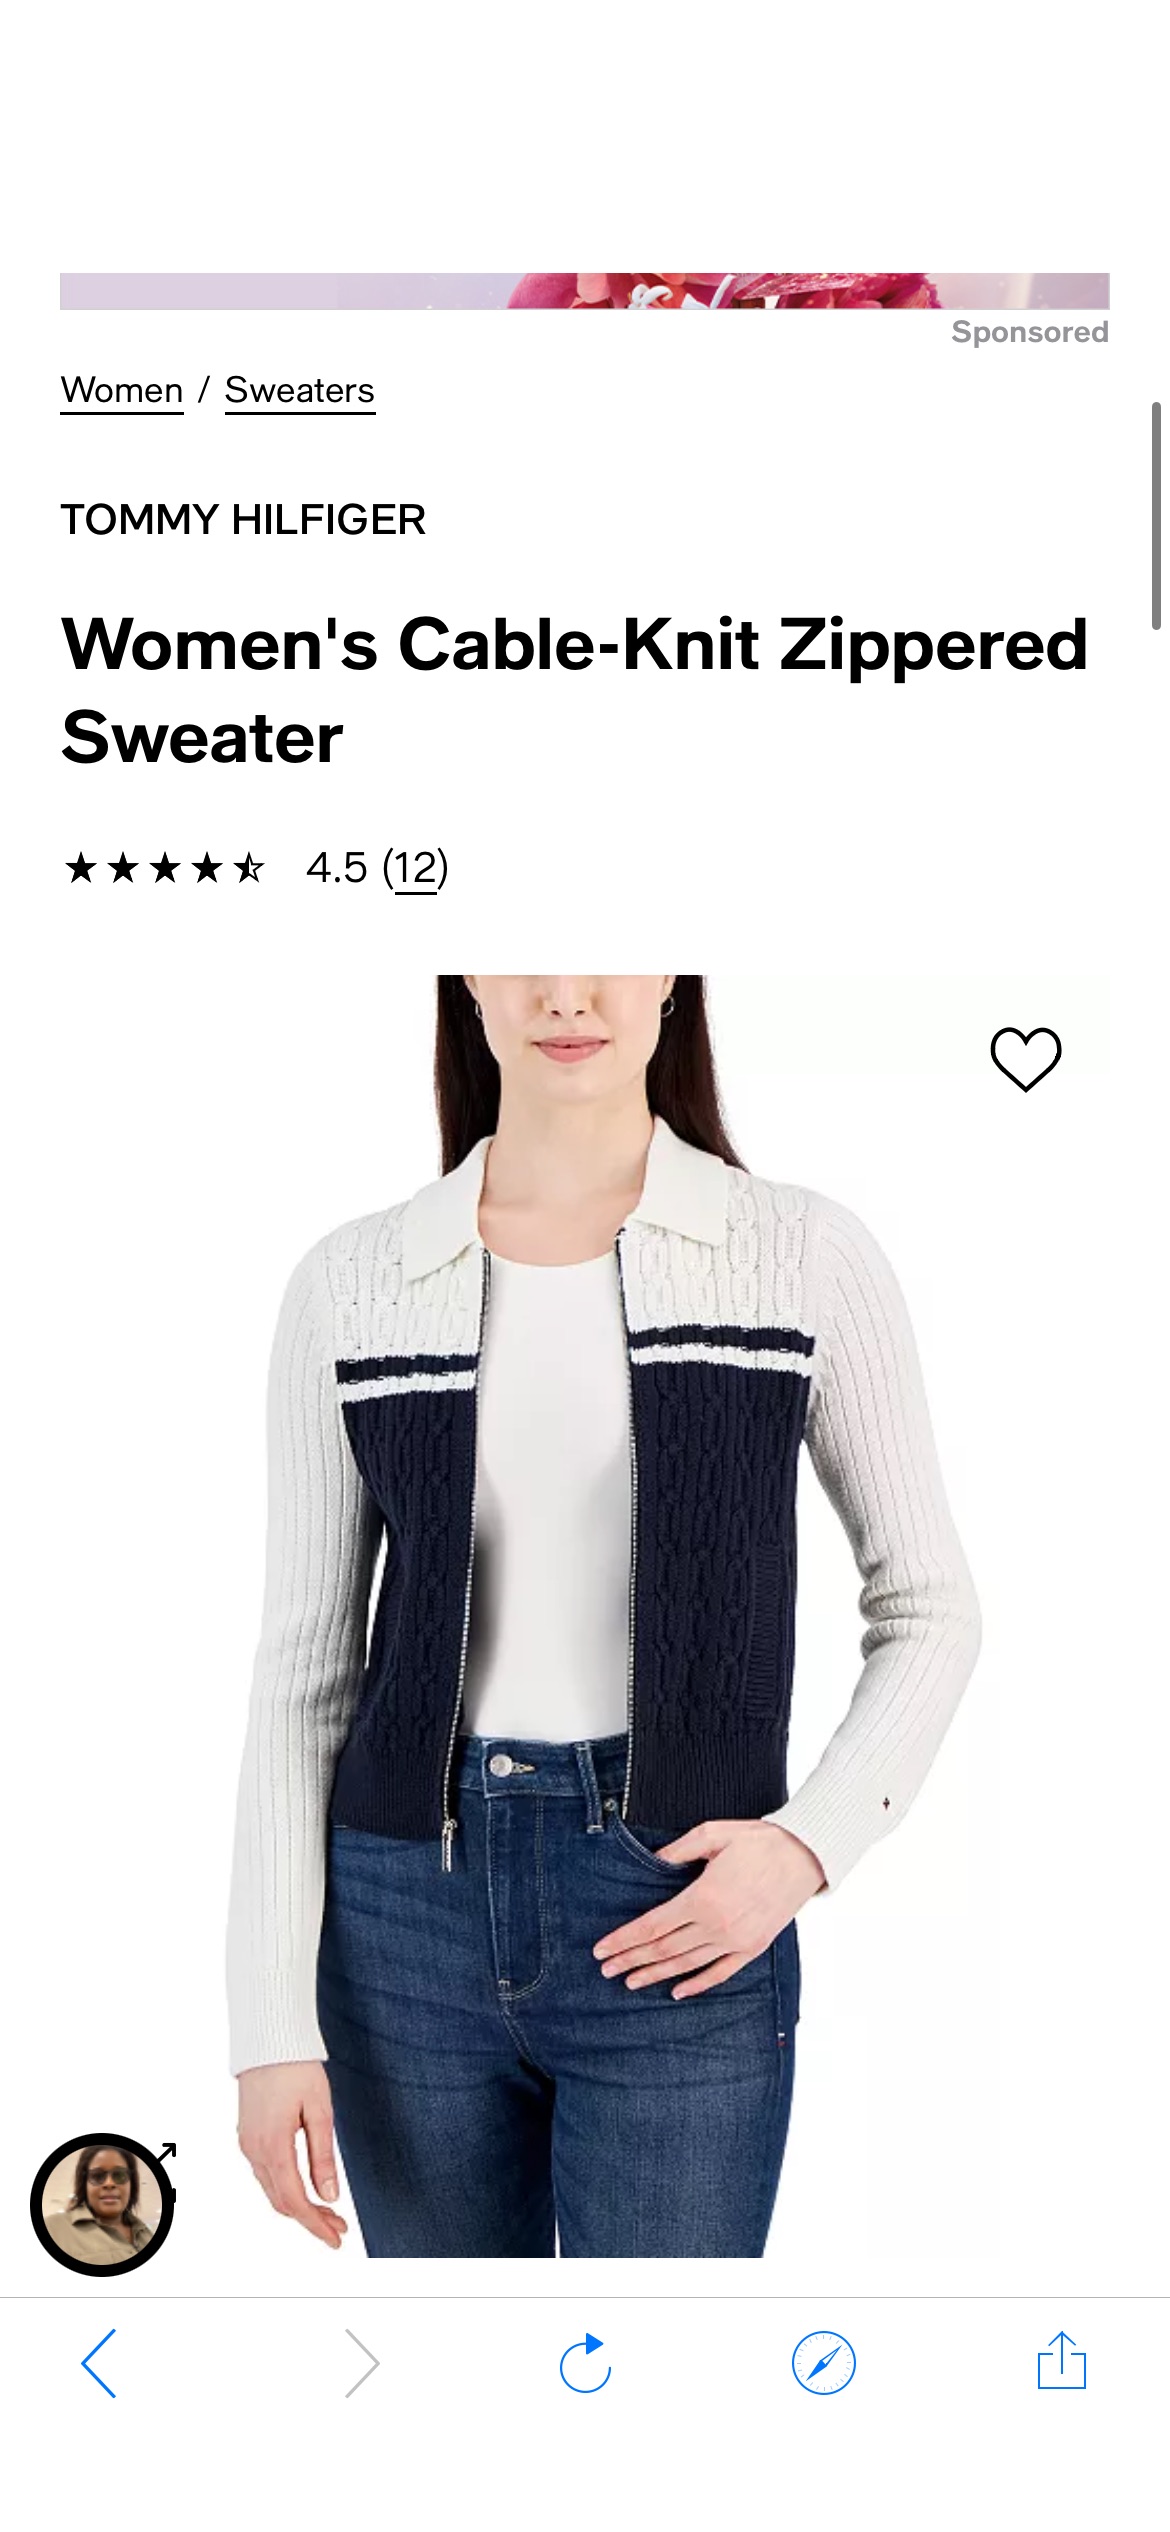 Tommy Hilfiger Women's Cable-Knit Zippered Sweater - Macy's外套